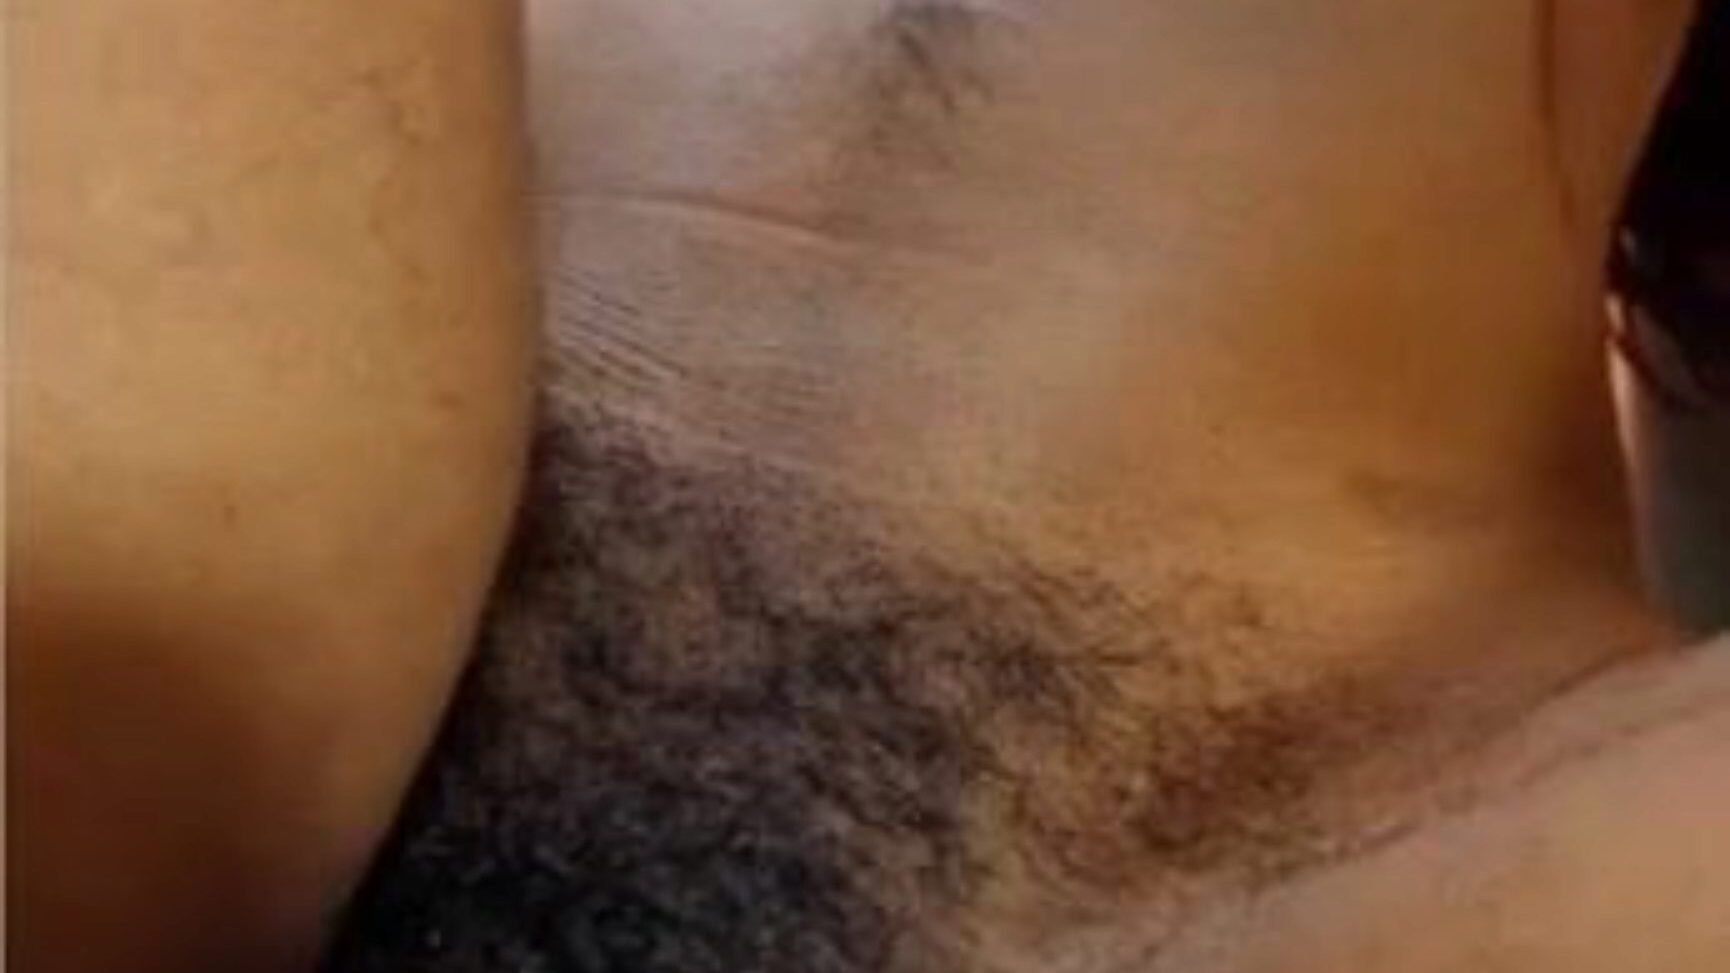 Peludas Mp 004: Free Black Porn Episode ef - xHamster See Peludas Mp 004 tube romp movie for free-for-all on xHamster, with the sexiest collection of Black Dilettante & Hirsute porn video vignettes